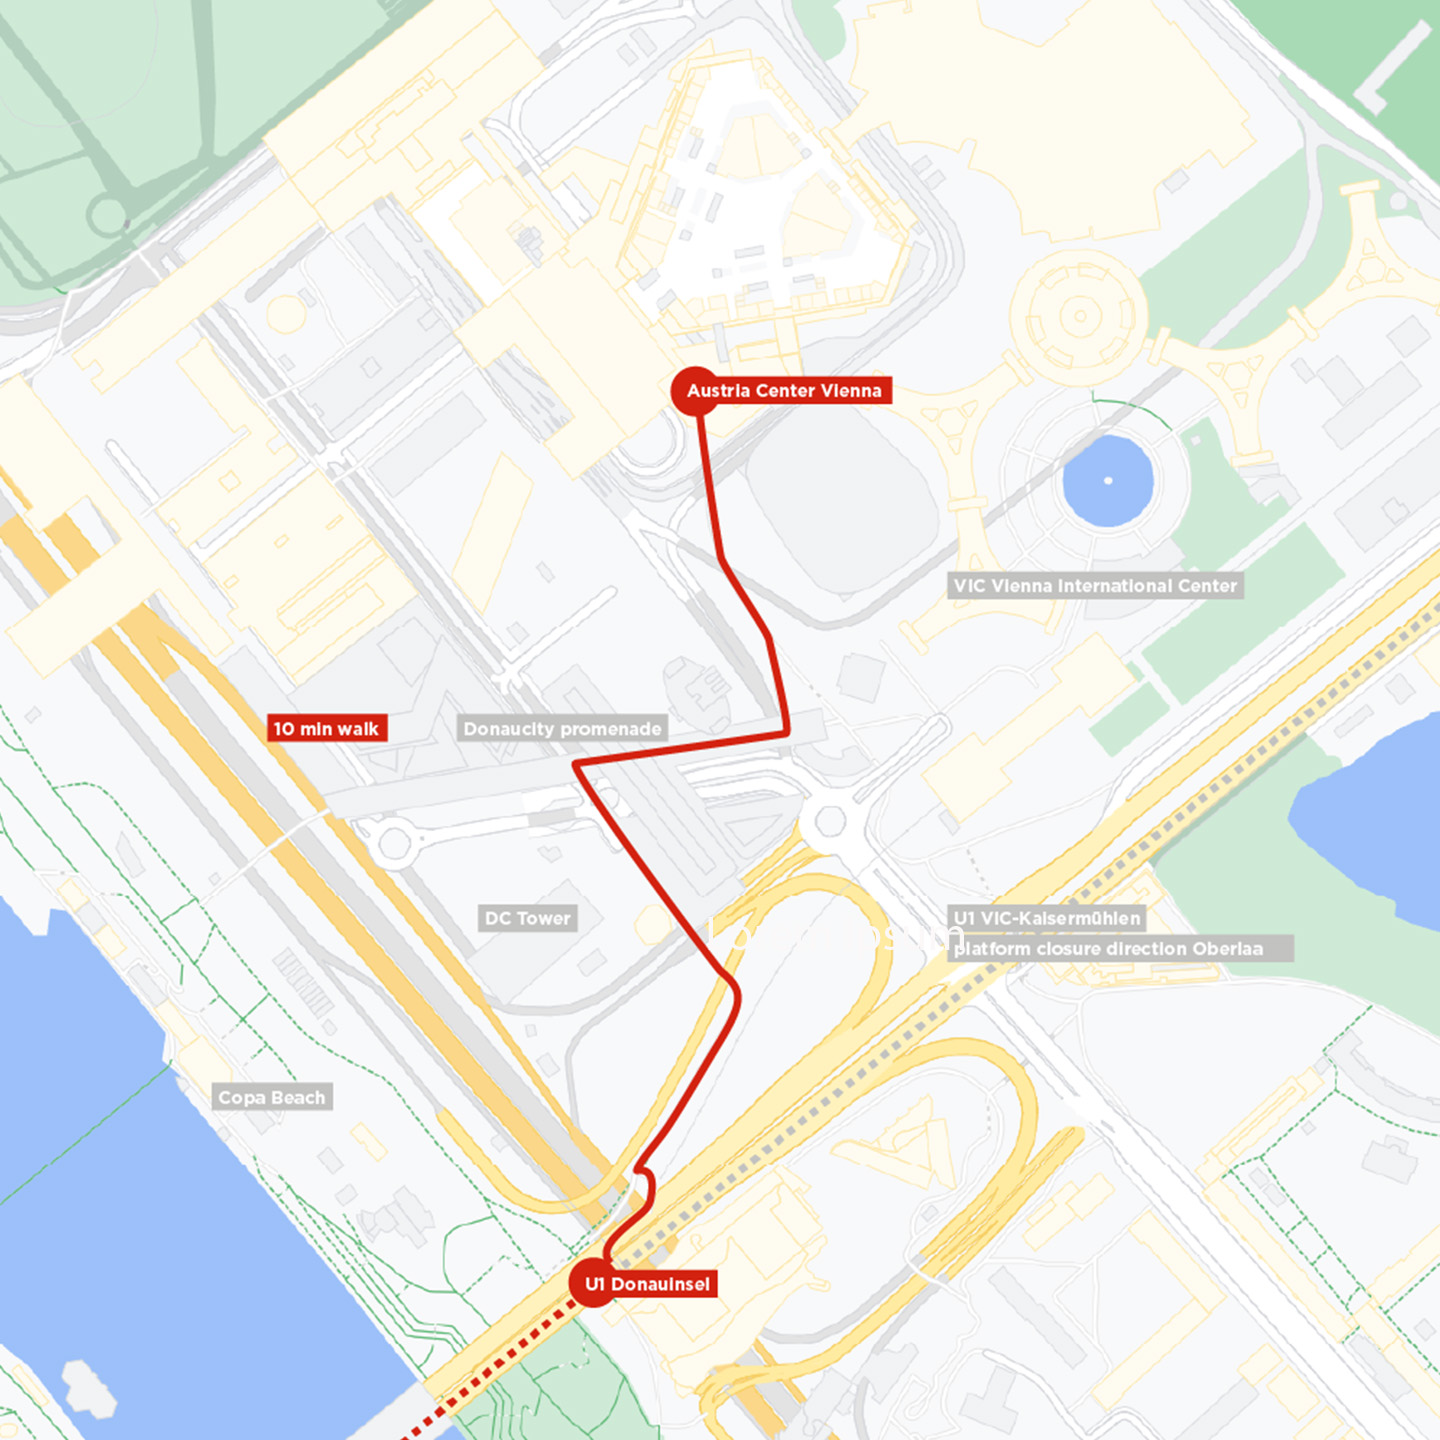 Map: How to get from Austria Center Vienna to IZD Tower